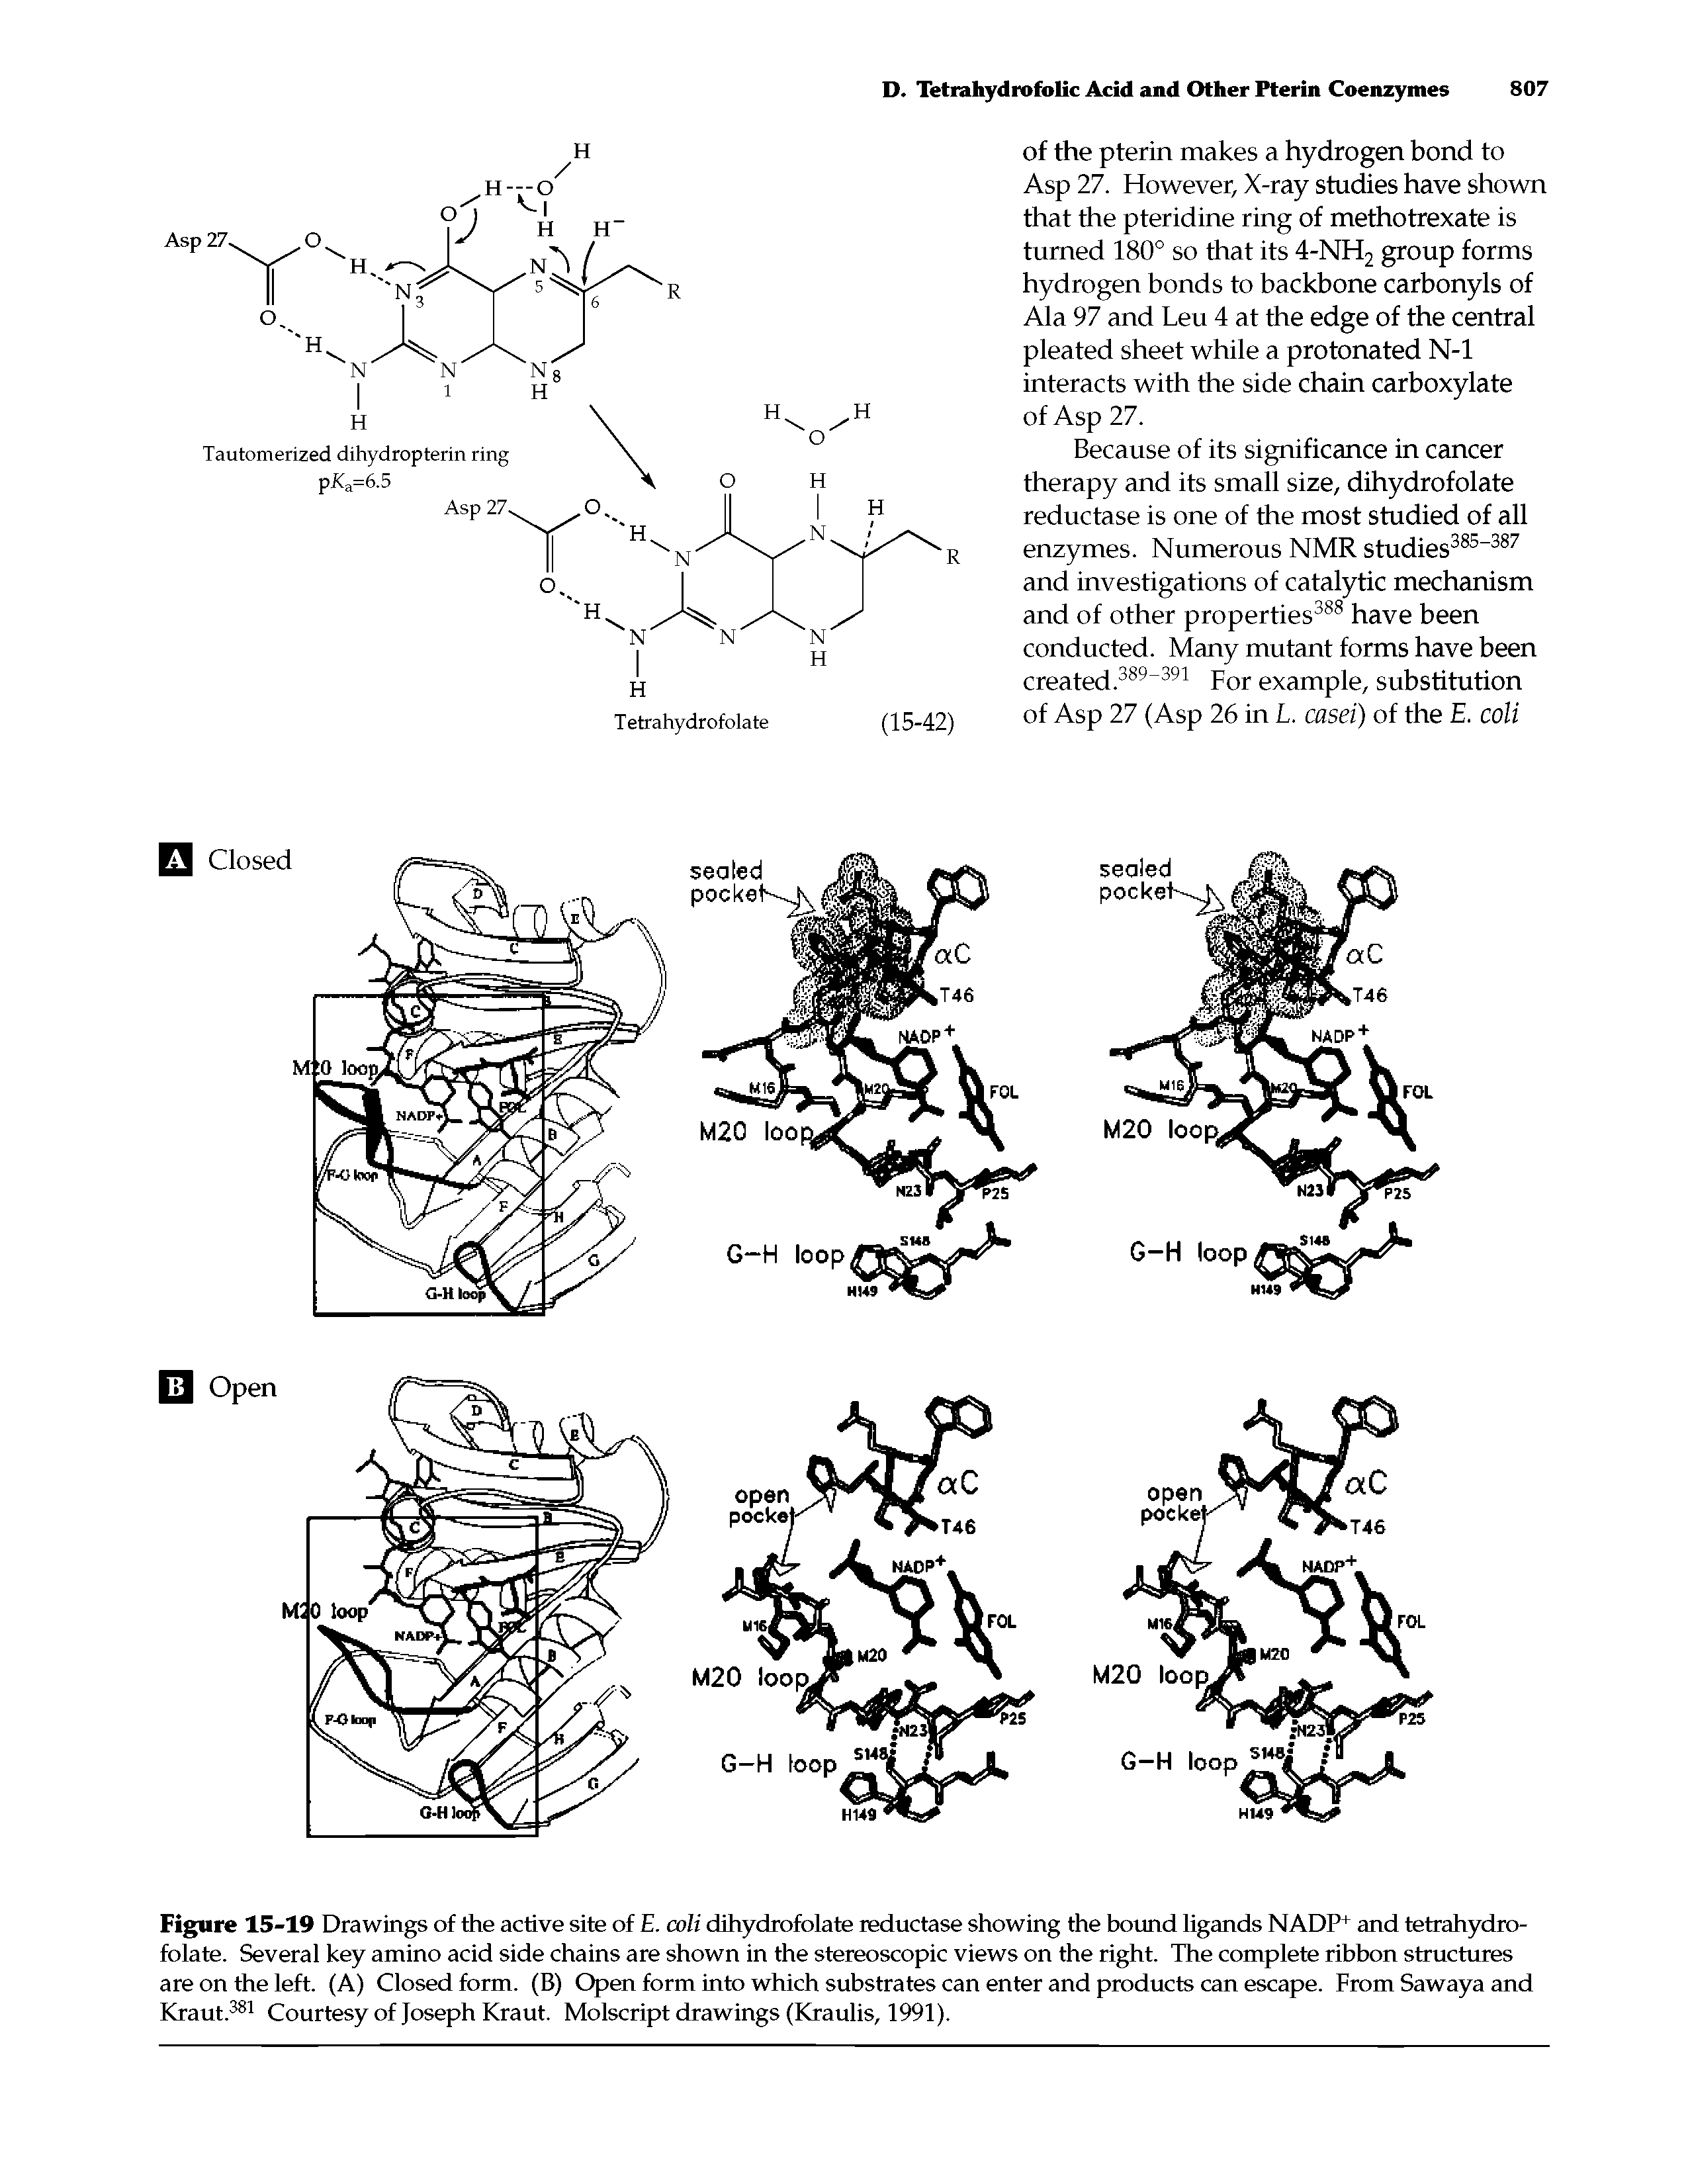 Figure 15-19 Drawings of the active site of E. coU dihydrofolate reductase showing the bound ligands NADP+ and tetrahydro-folate. Several key amino acid side chains are shown in the stereoscopic views on the right. The complete ribbon structures are on the left. (A) Closed form. (B) Open form into which substrates can enter and products can escape. From Sawaya and Kraut. Courtesy of Joseph Kraut. Molscript drawings (Kraulis, 1991).